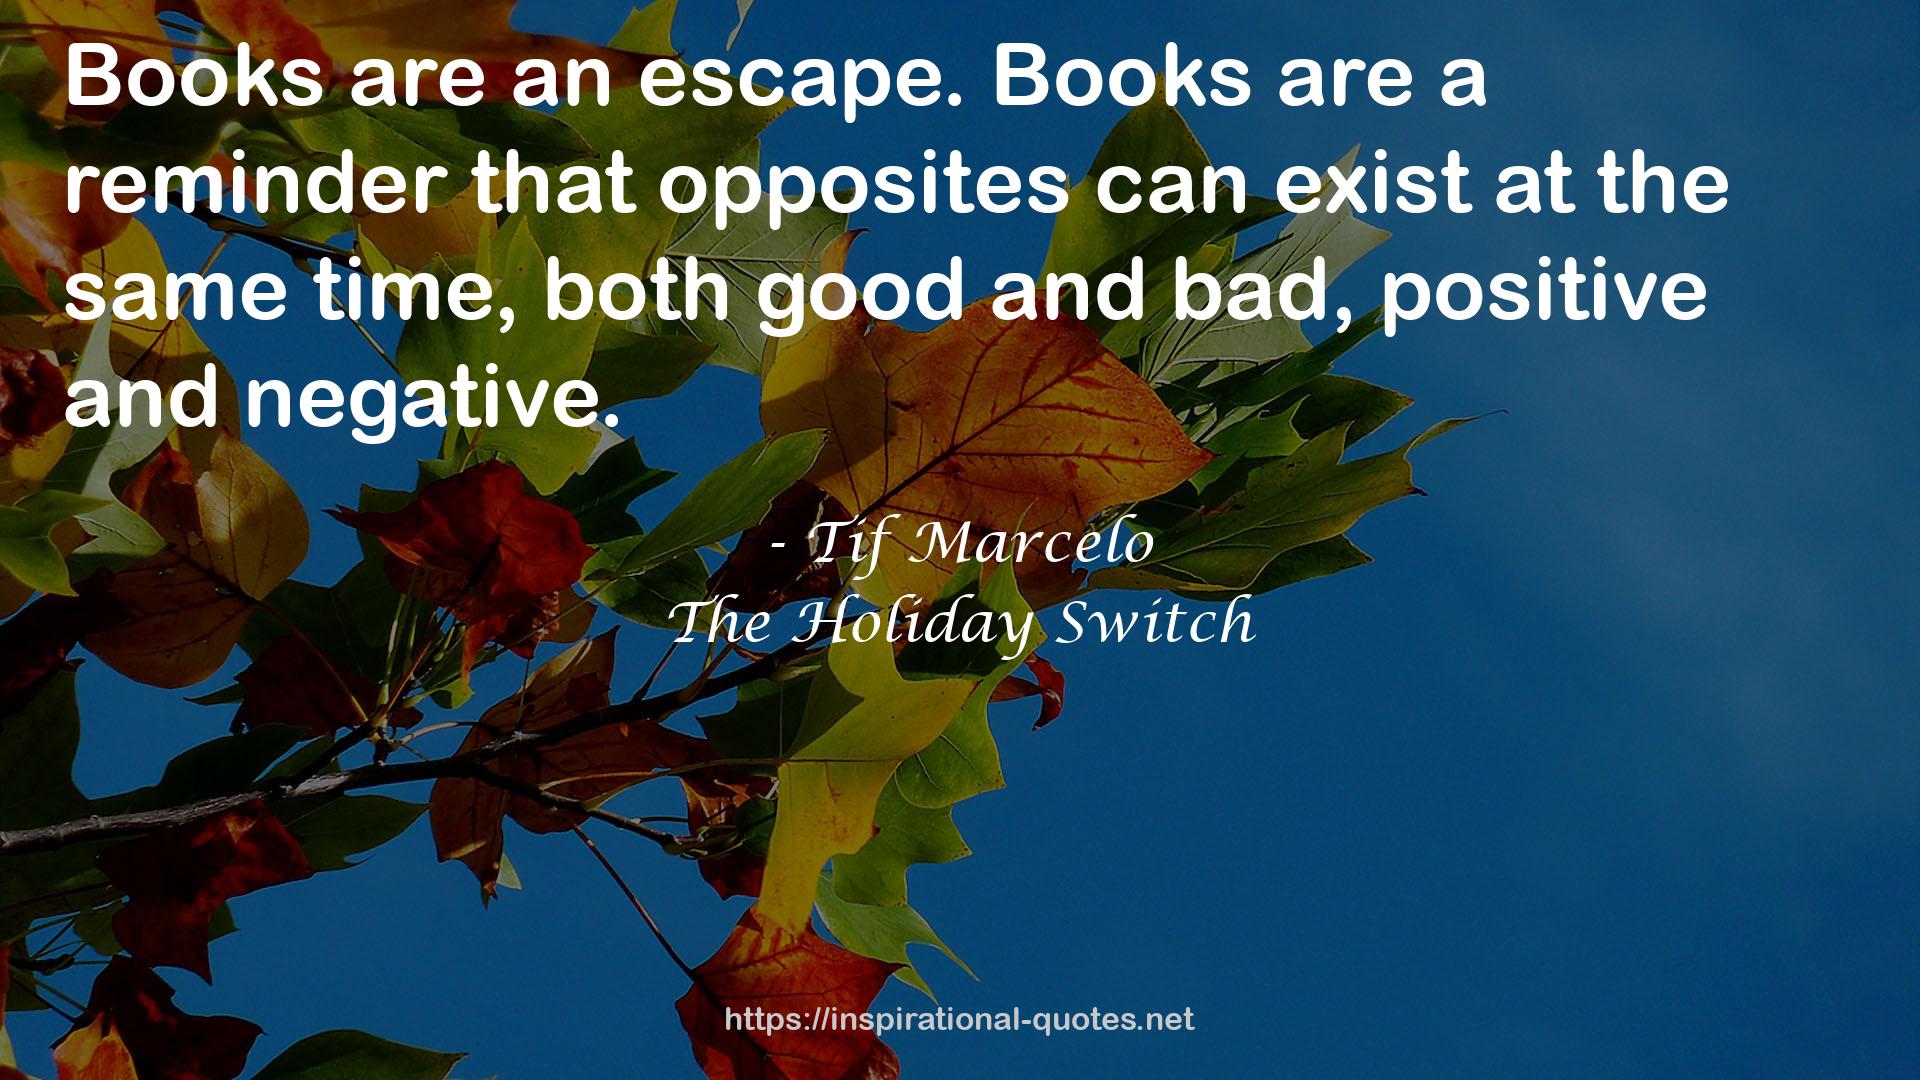 The Holiday Switch QUOTES